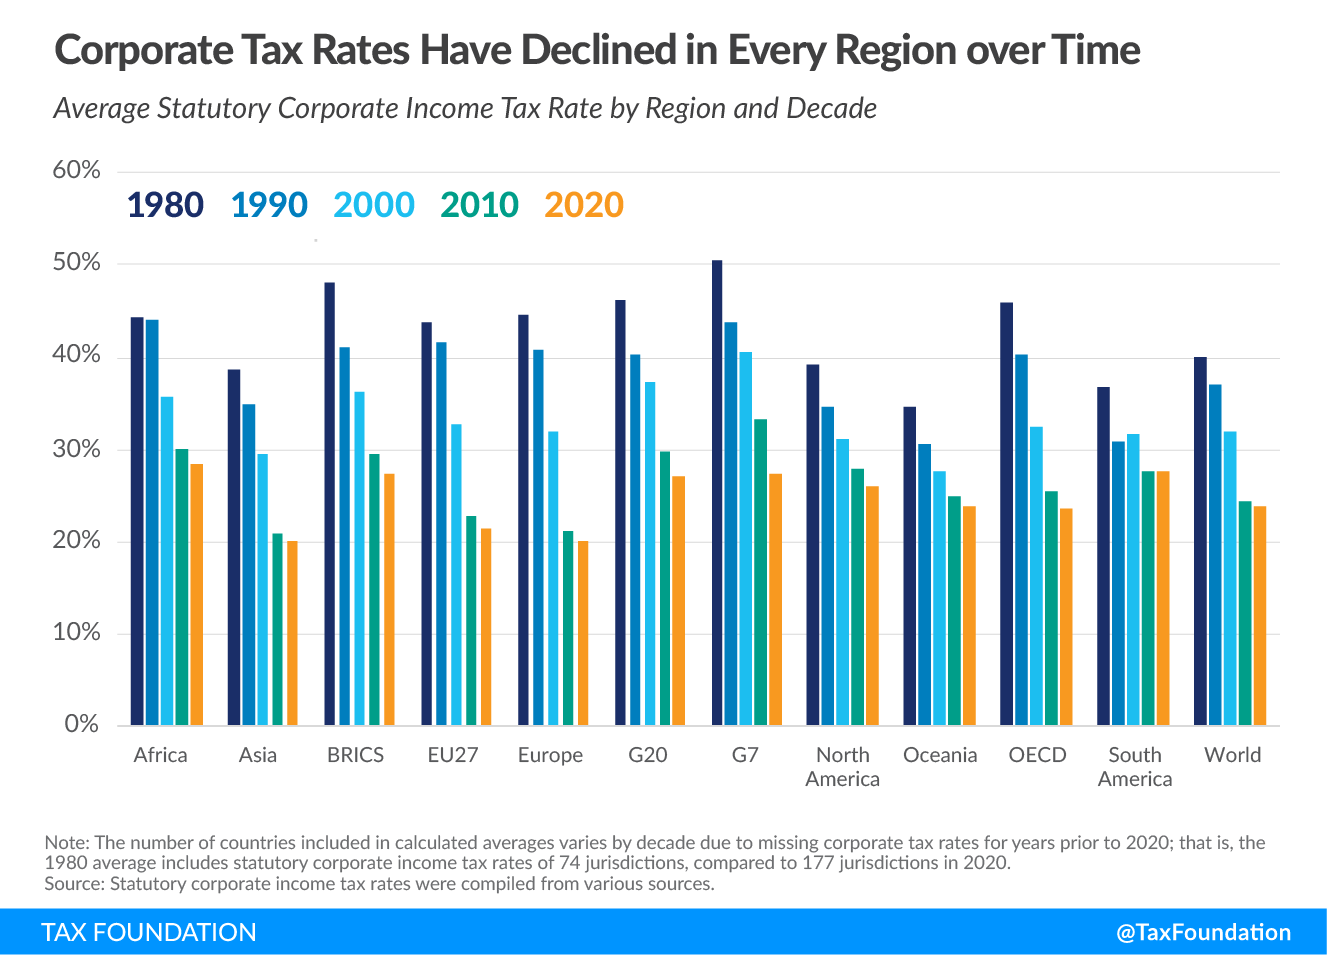 Corporate tax rates have declined in every region around the world over time. 2020 corporate tax rates around the world, 2020 corporate tax trends